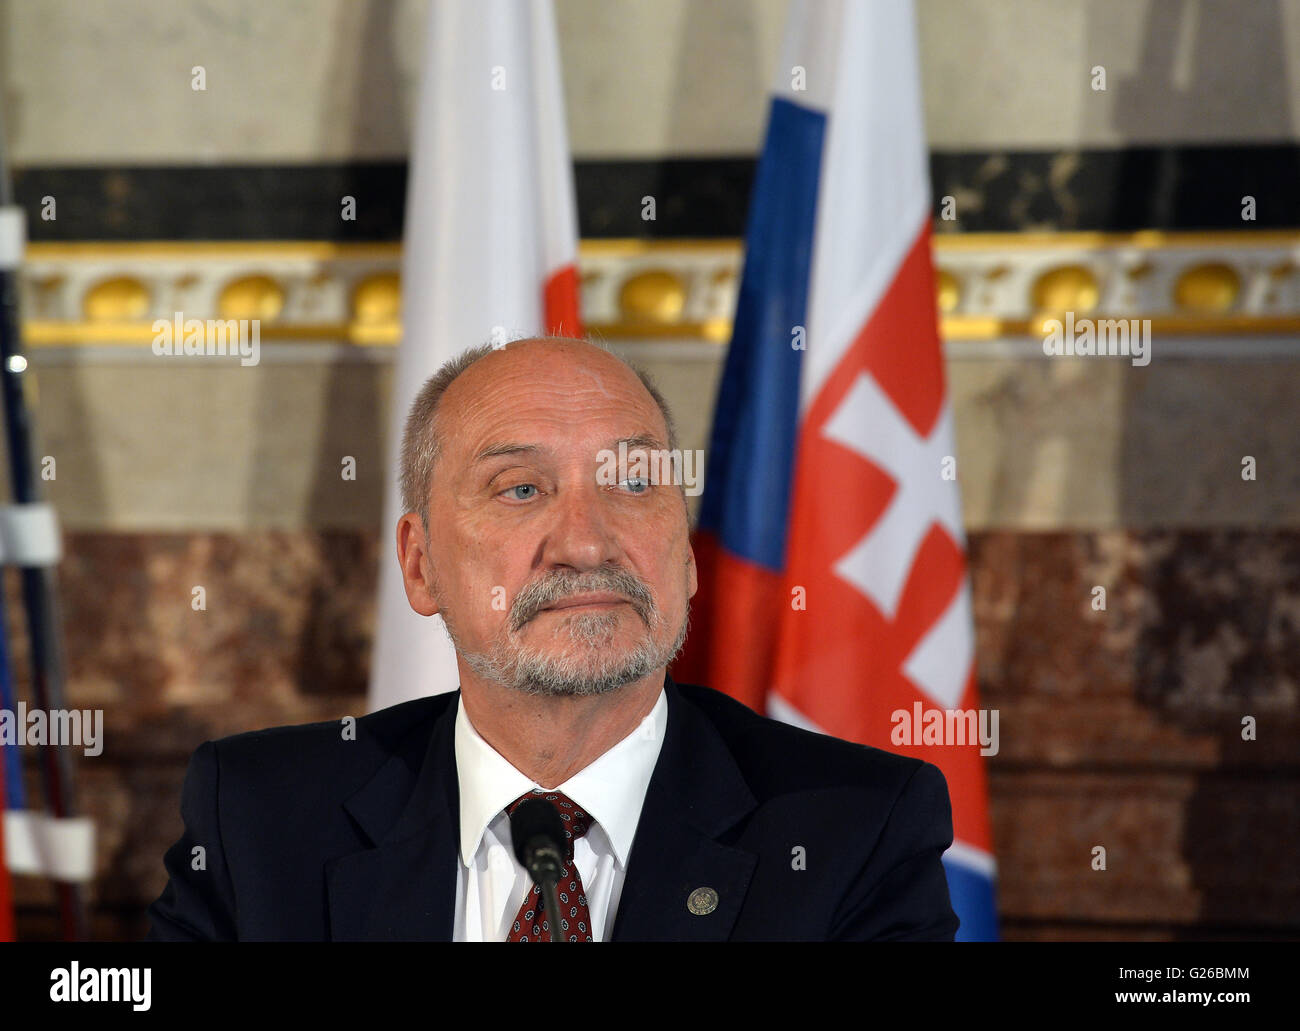 Liblice, Czech Republic. 25th May, 2016. Polish defence minister Antoni Macierewicz attends the meeting of Visegrad Four (V4) countries' defence ministers in Liblice, Czech Republic, May 25, 2016. Credit:  Katerina Sulova/CTK Photo/Alamy Live News Stock Photo